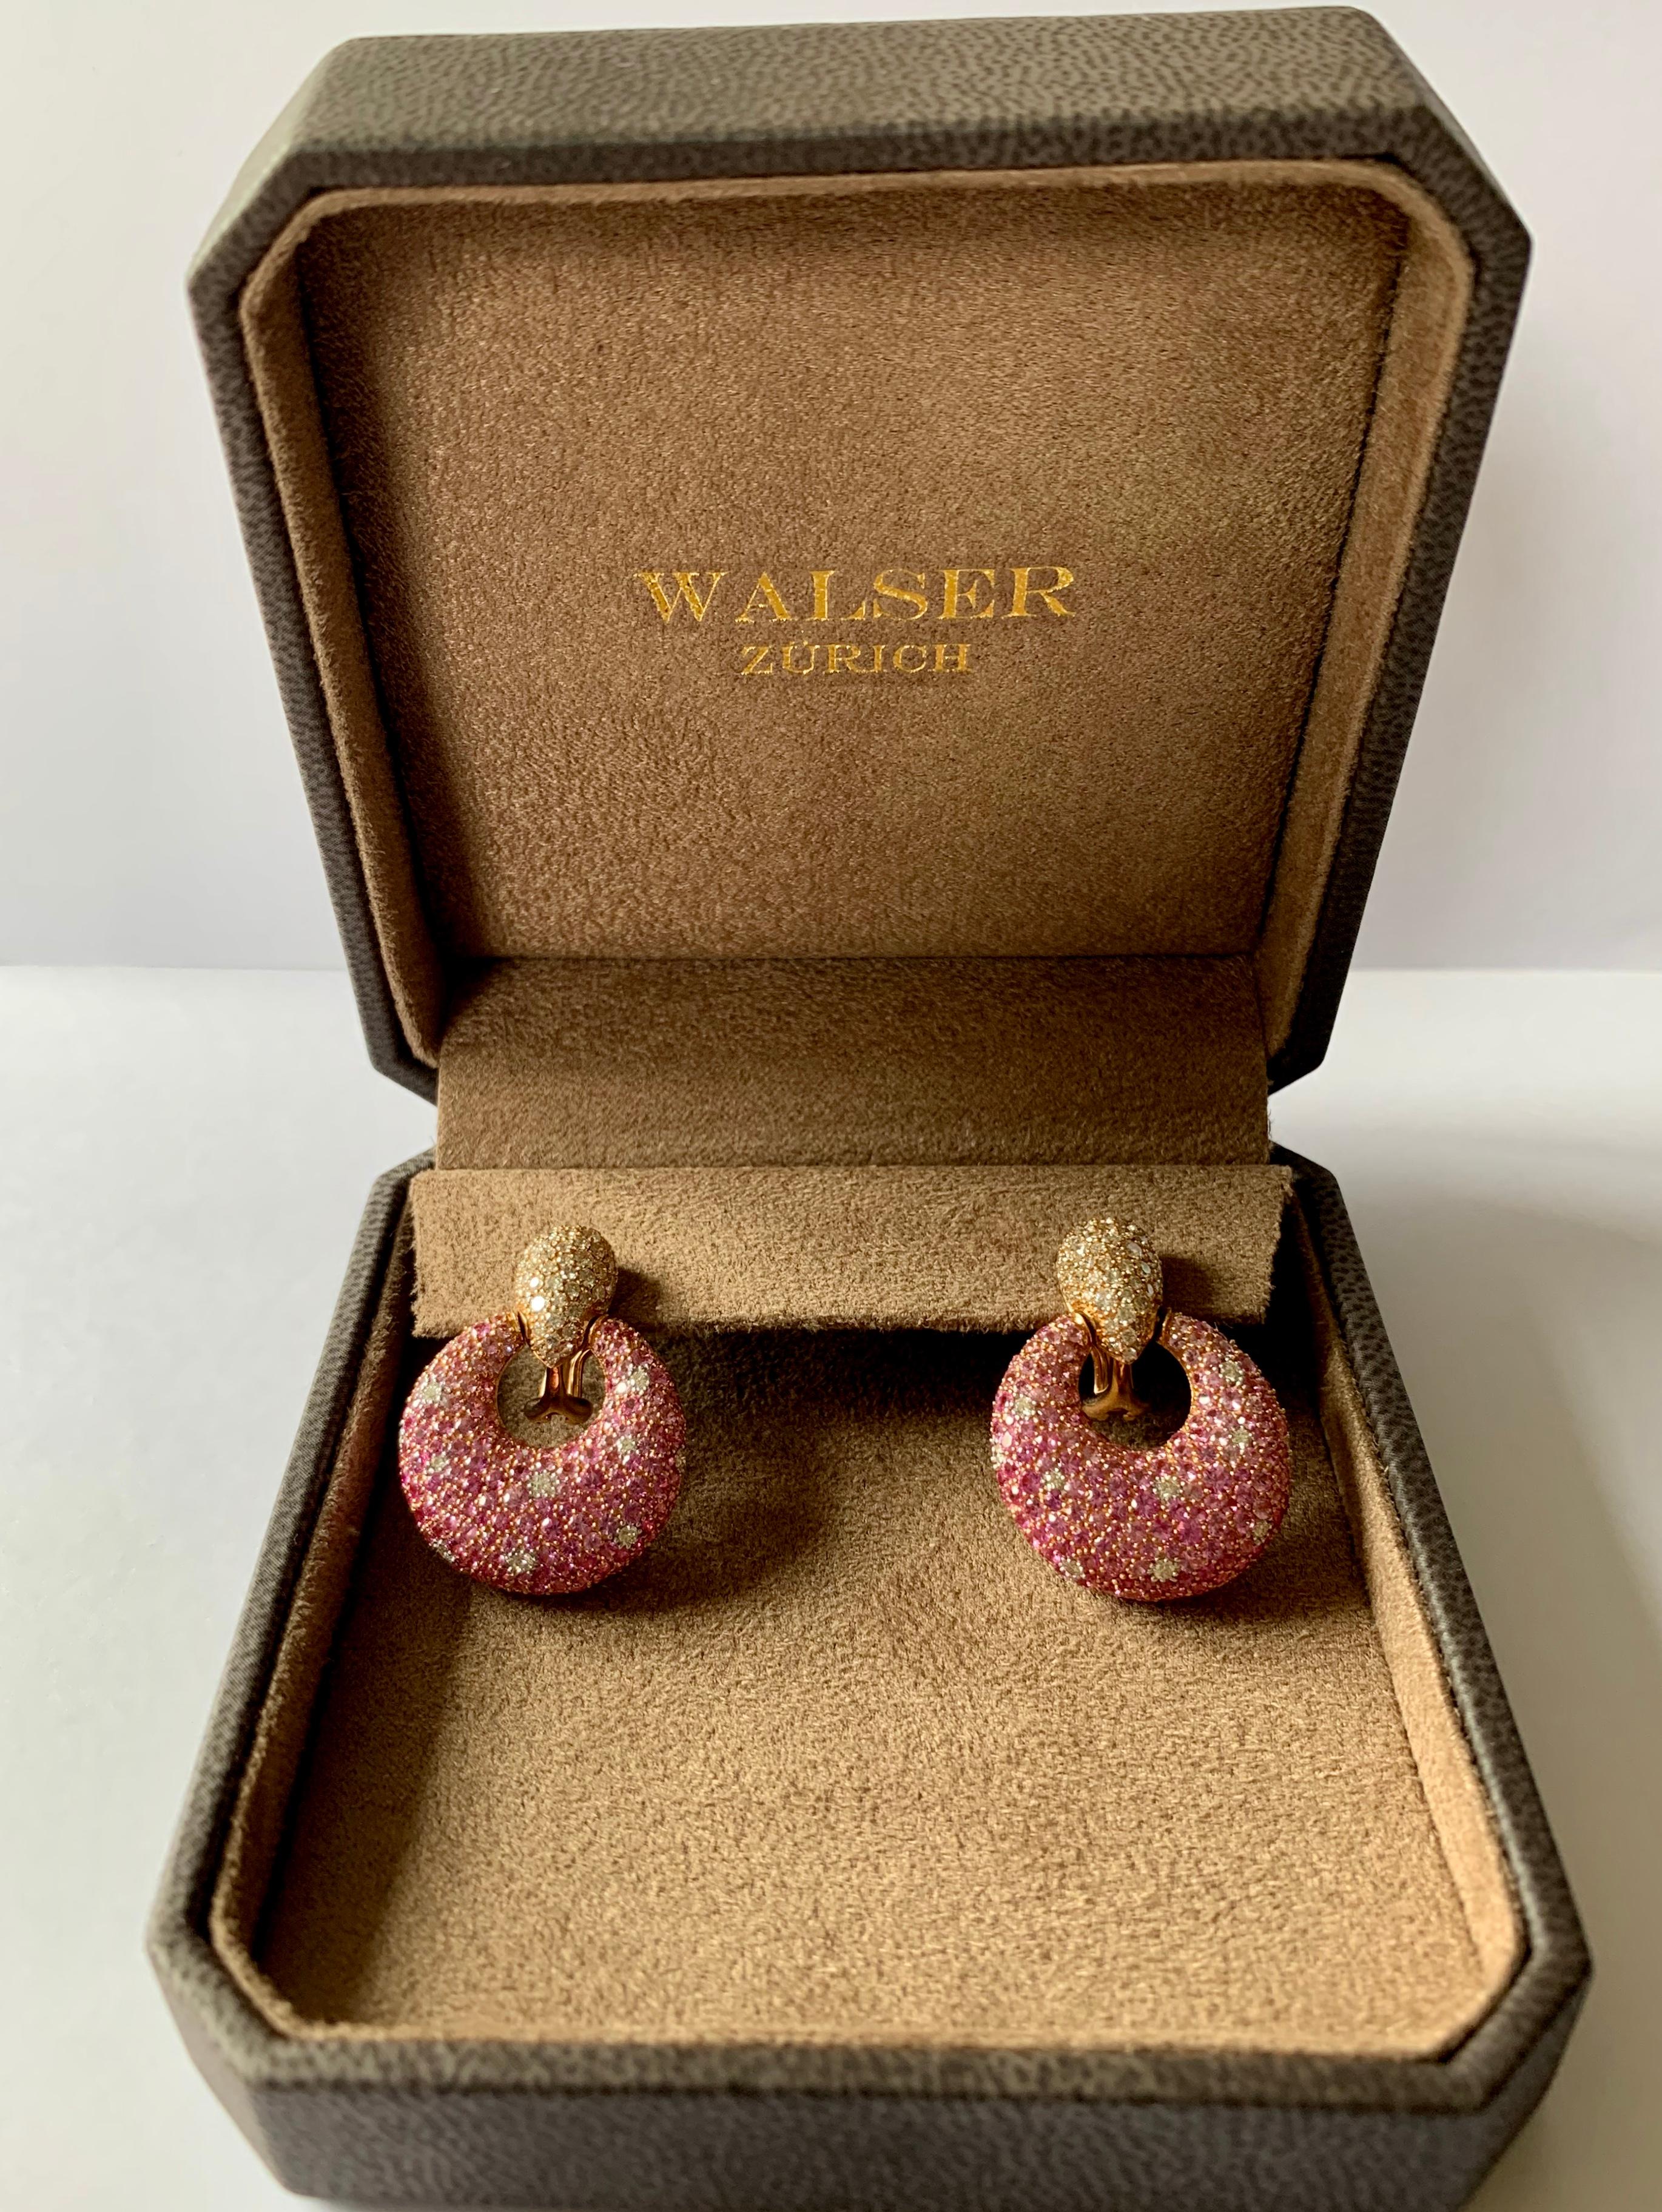 Gorgeous 18 K pink Gold earrings featuring 415 pave set pink Sapphires with a weight of 7.80 ct and 142 pave set brilliant cut Diamonds weighing 1.89 ct, G color, vs clarity. 
Beautiful color combination!
Authenticity and money back is guaranteed. 